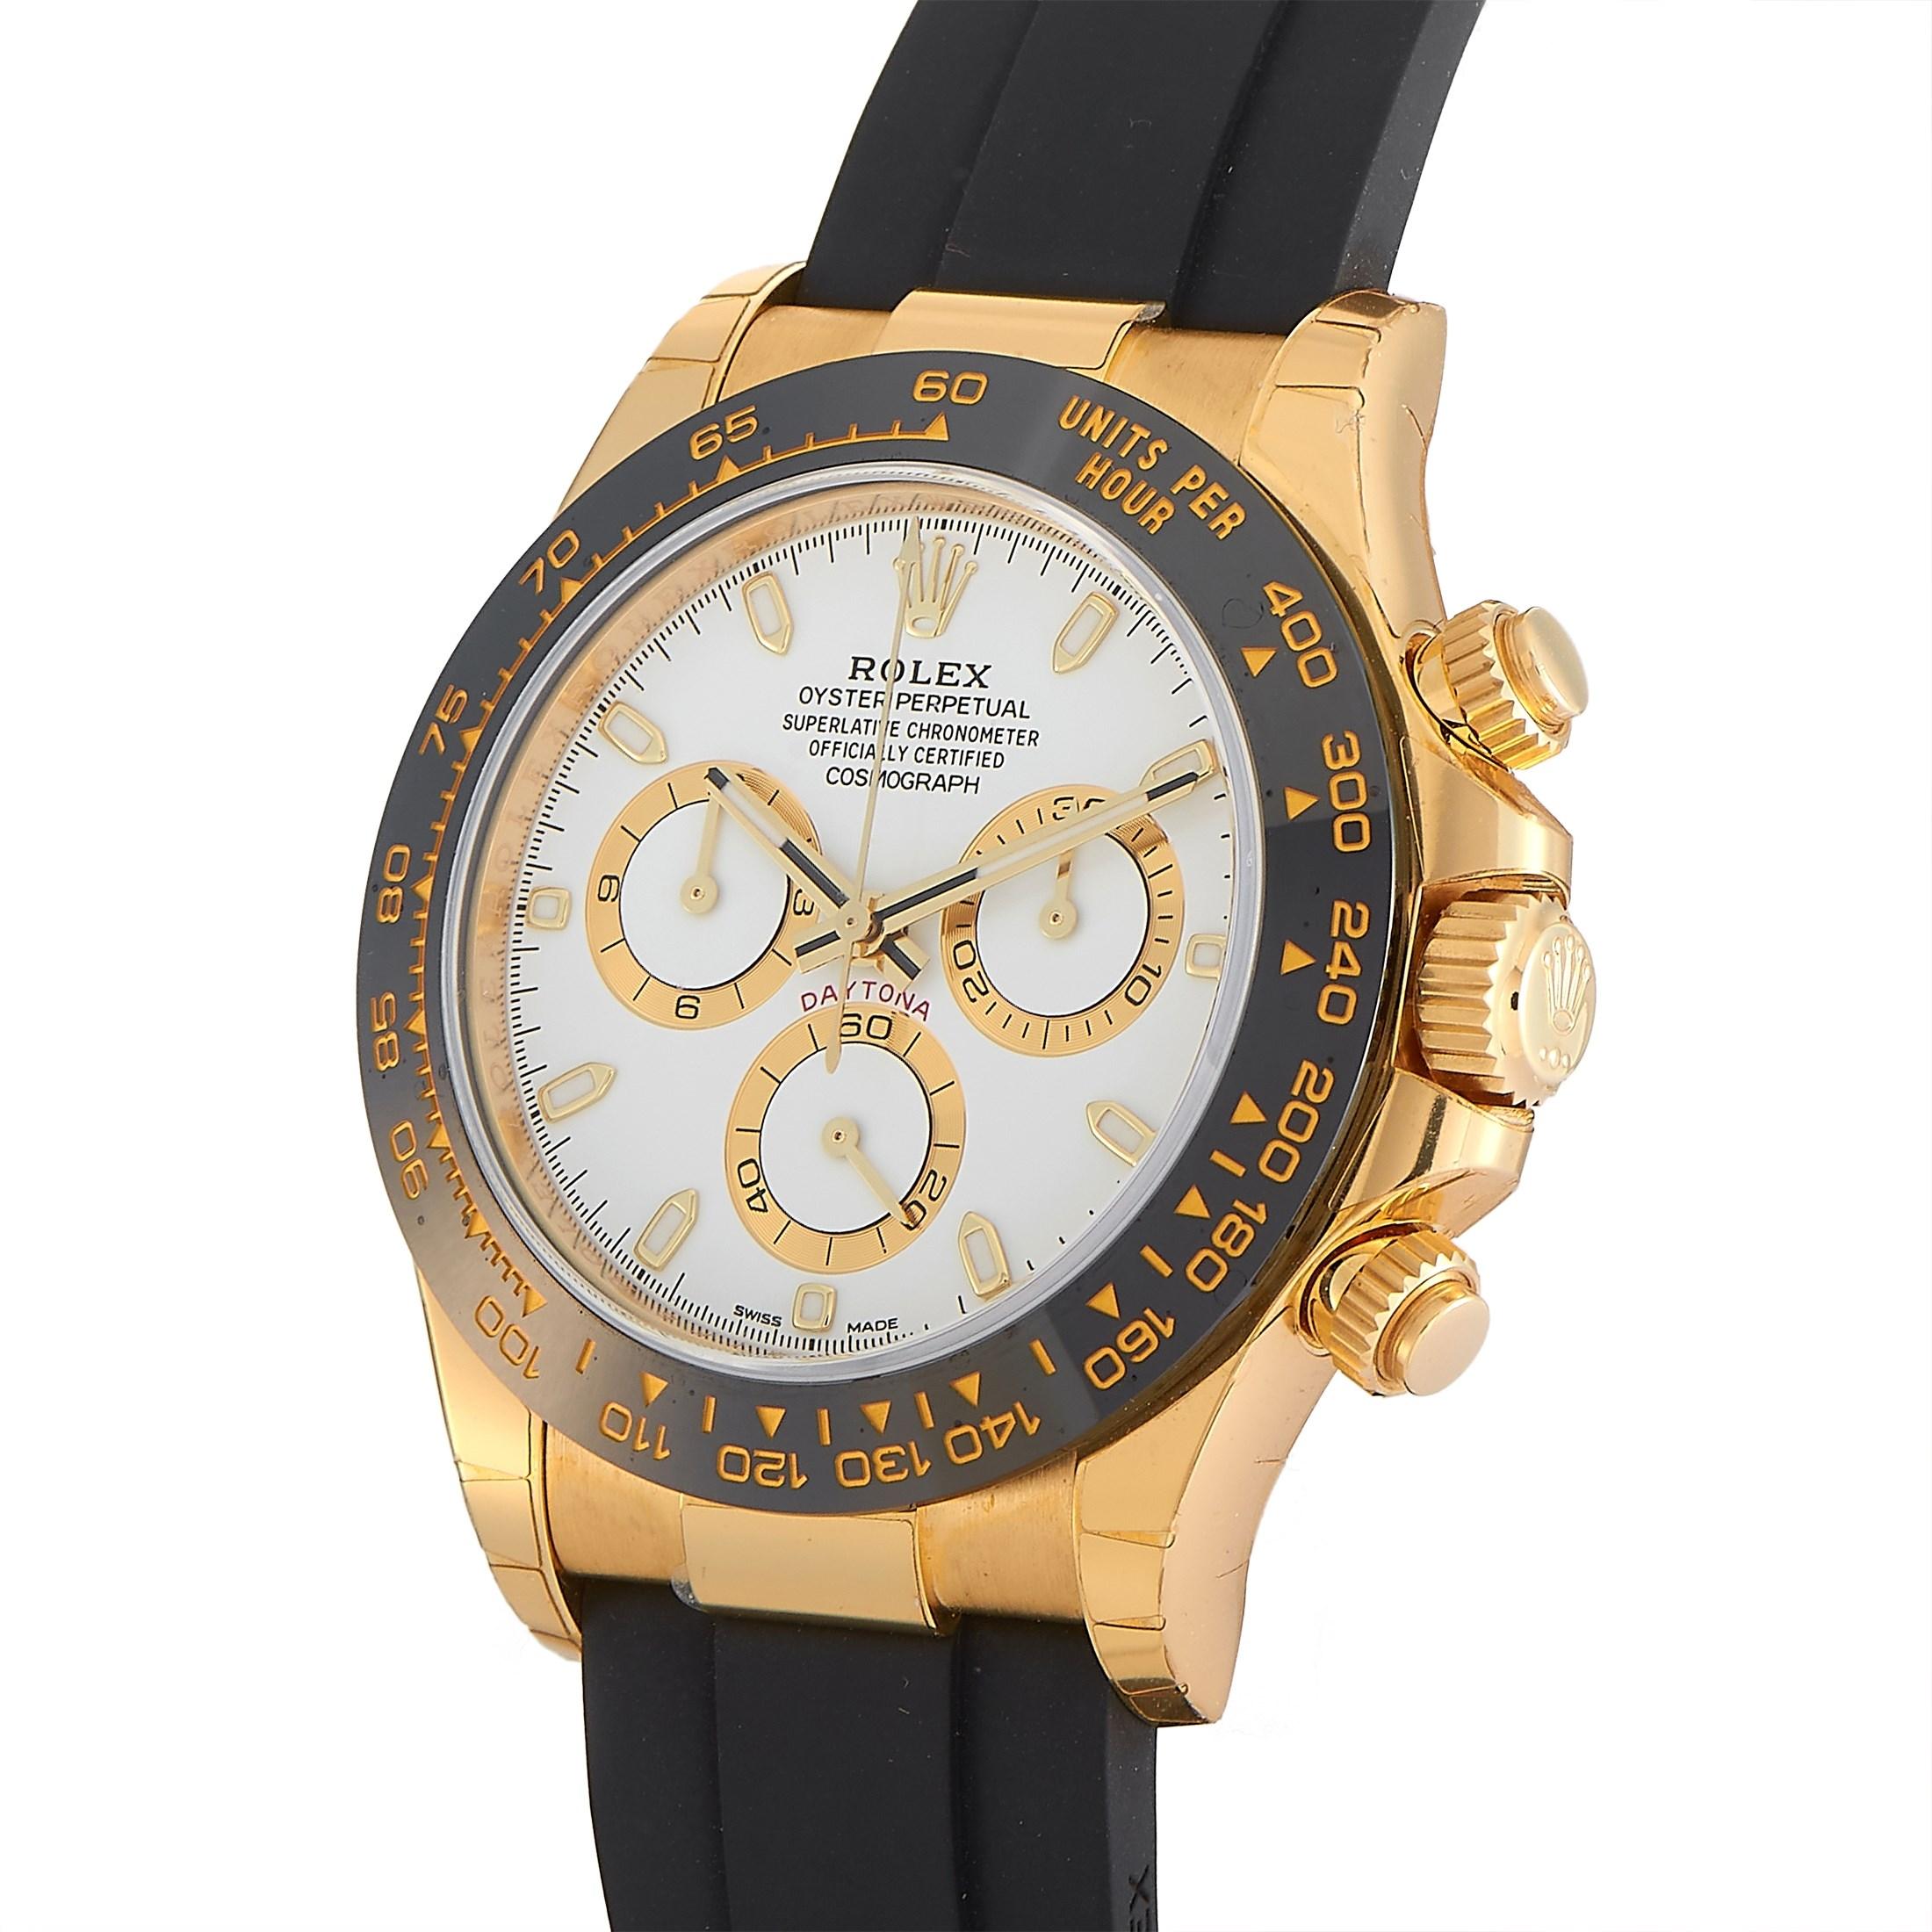 An iconic watch loved for its well-proportioned design. The Rolex Cosmograph Daytona Yellow Gold Oysterflex Watch 116518LN-0041 features a 40 mm round case in 18K yellow gold with black Cerachrom bezel engraved with a tachymetric scale Displaying